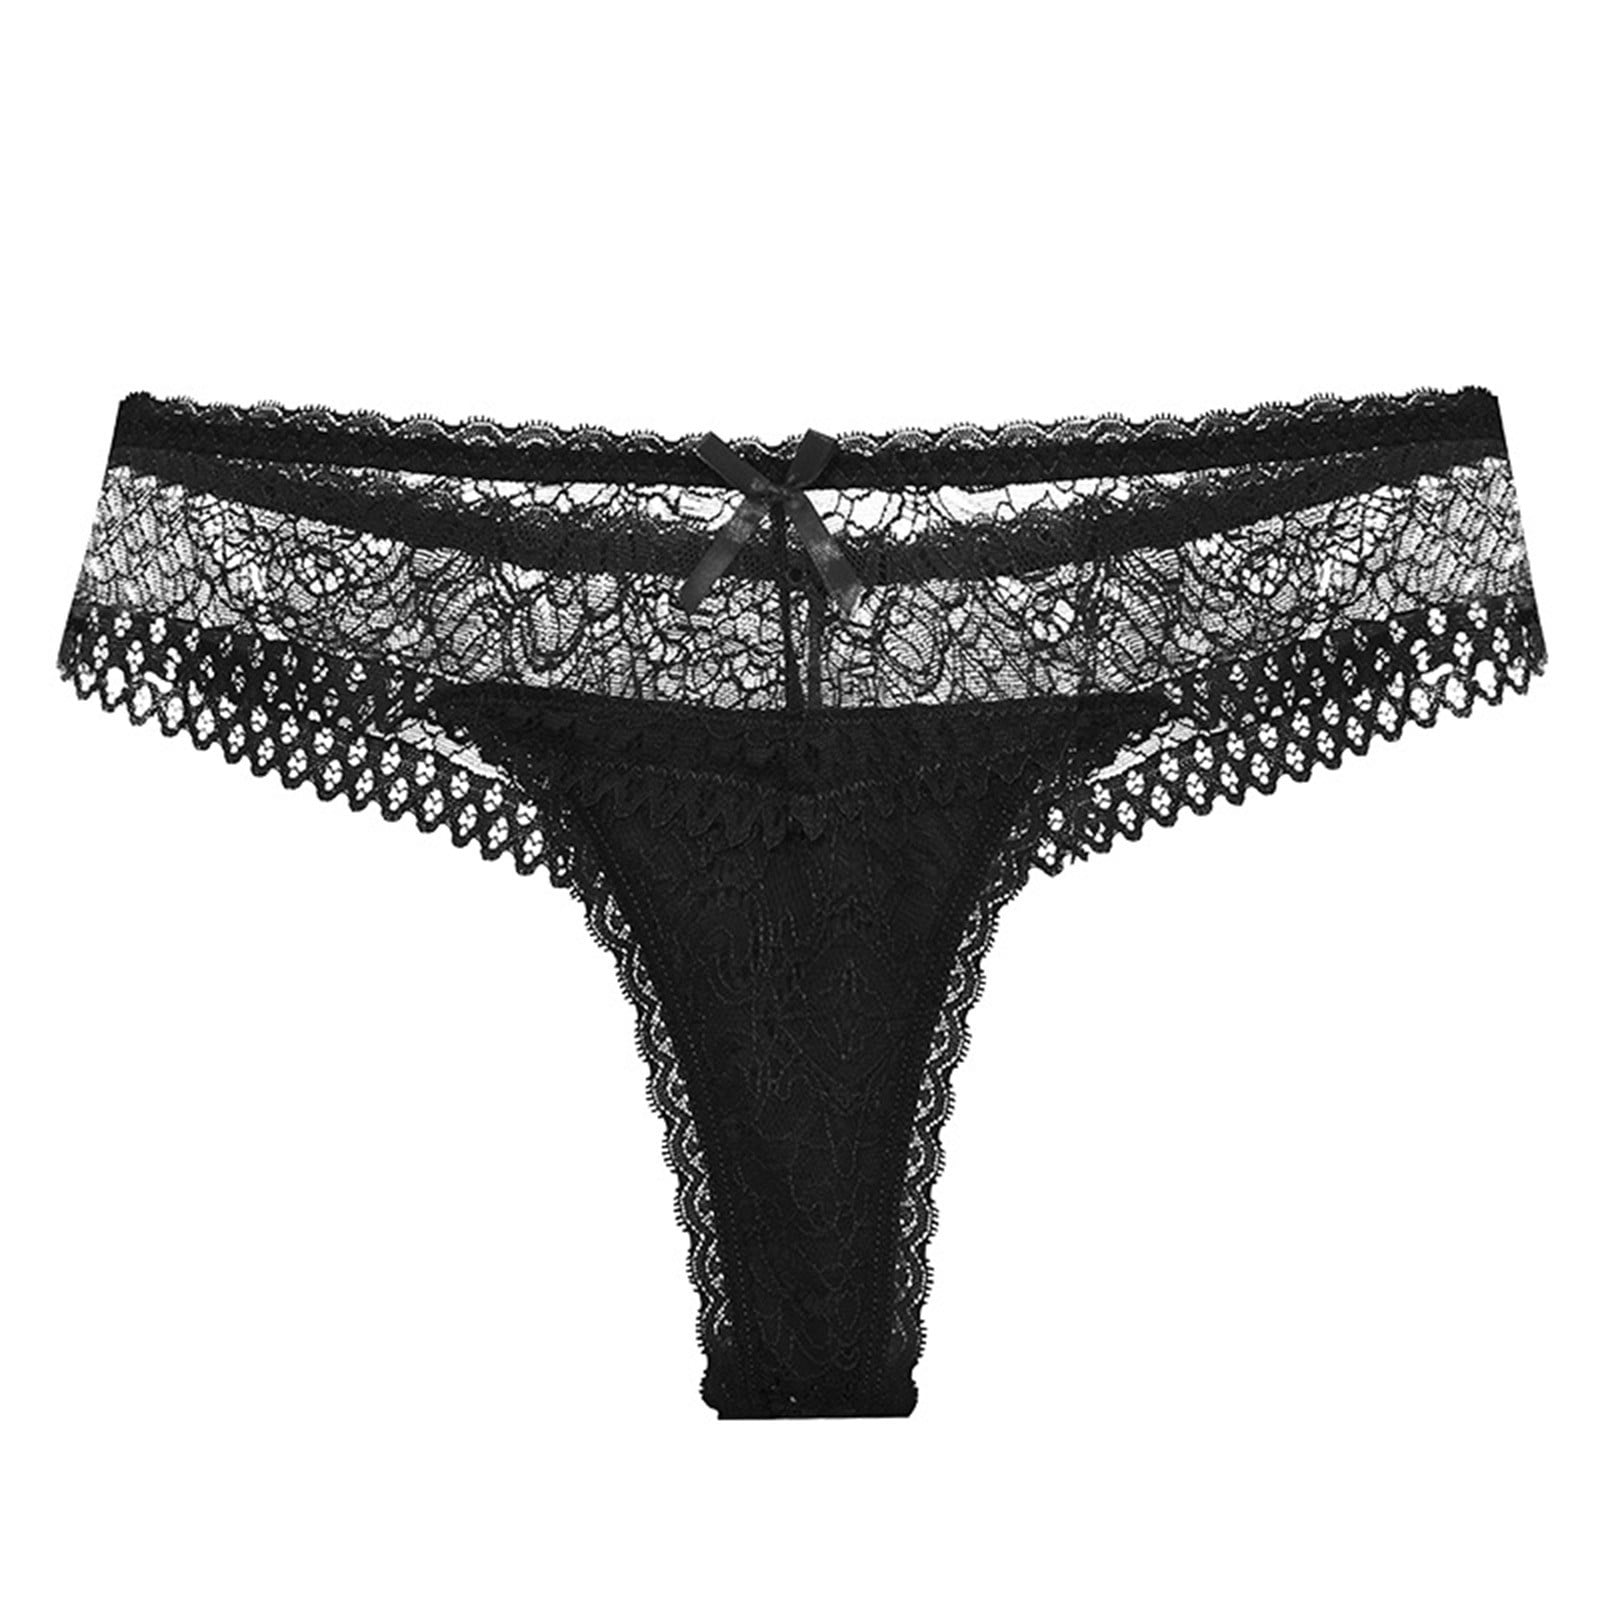 Hesxuno Lingerie For Women For Sex Women Cutut Lace Underwear Briefs Panties Sexy Hollow Out